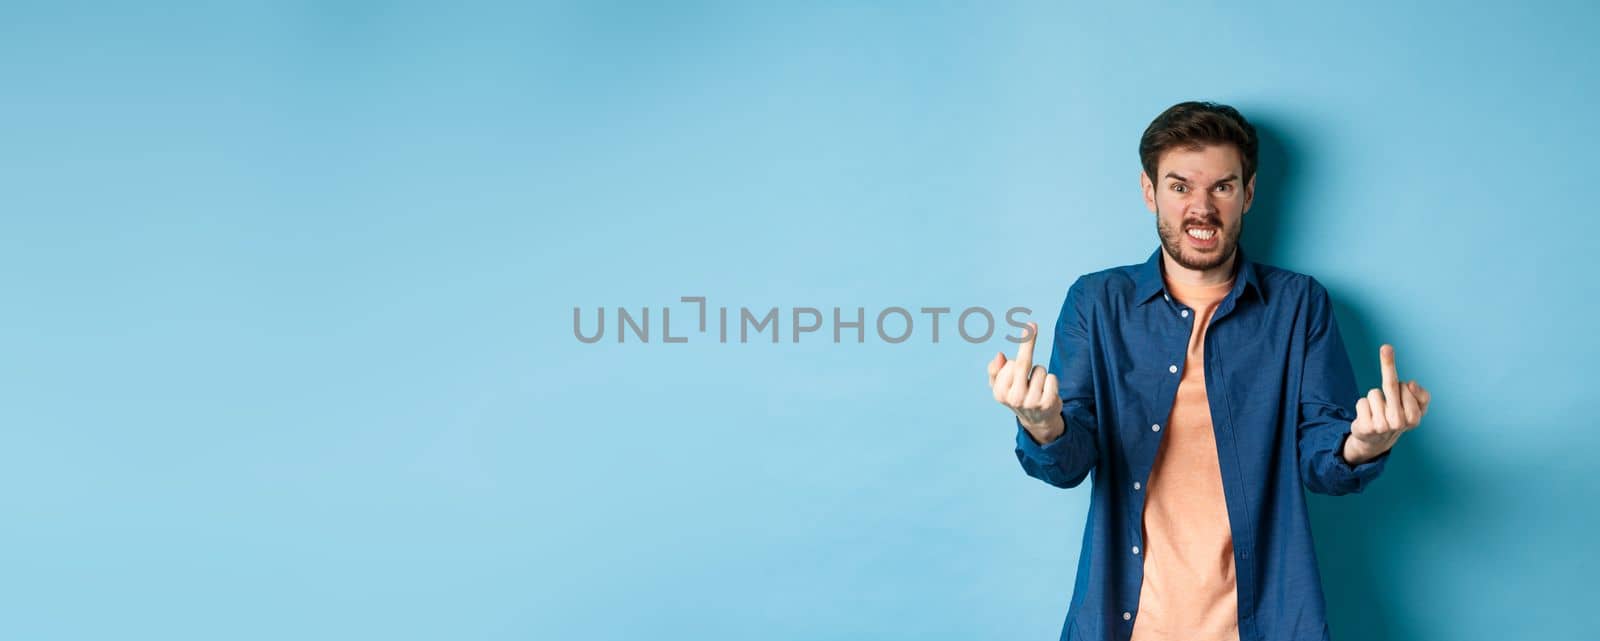 Angry rude guy showing middle finger and saying fuck you, swearing and staring furious at camera, standing on blue background.